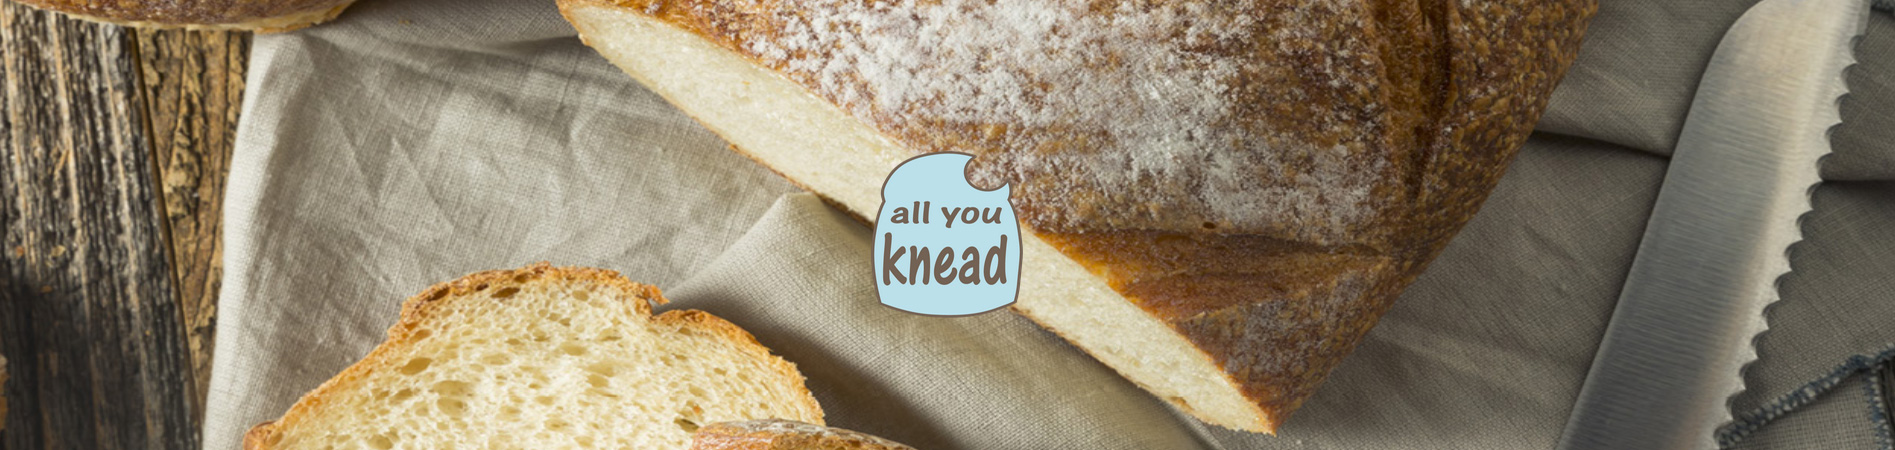 all-you-knead